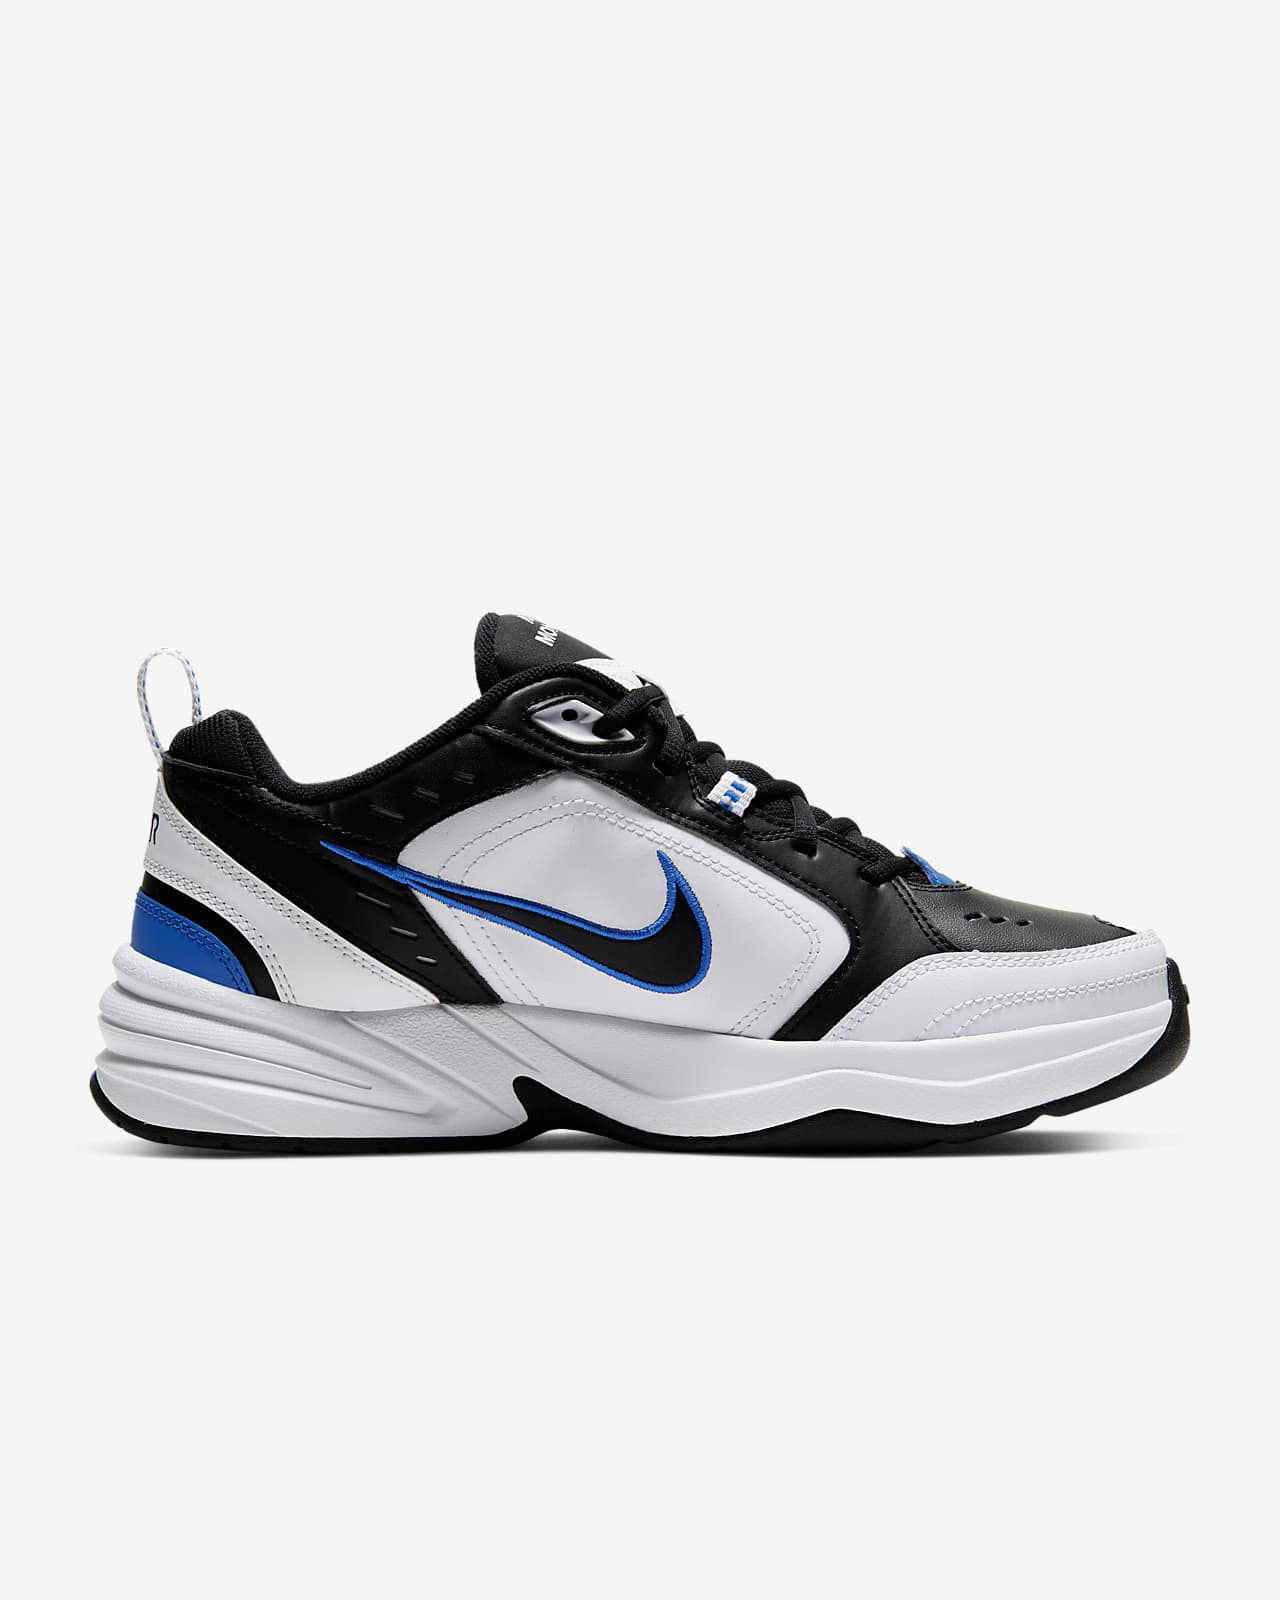 nike air monarch for running